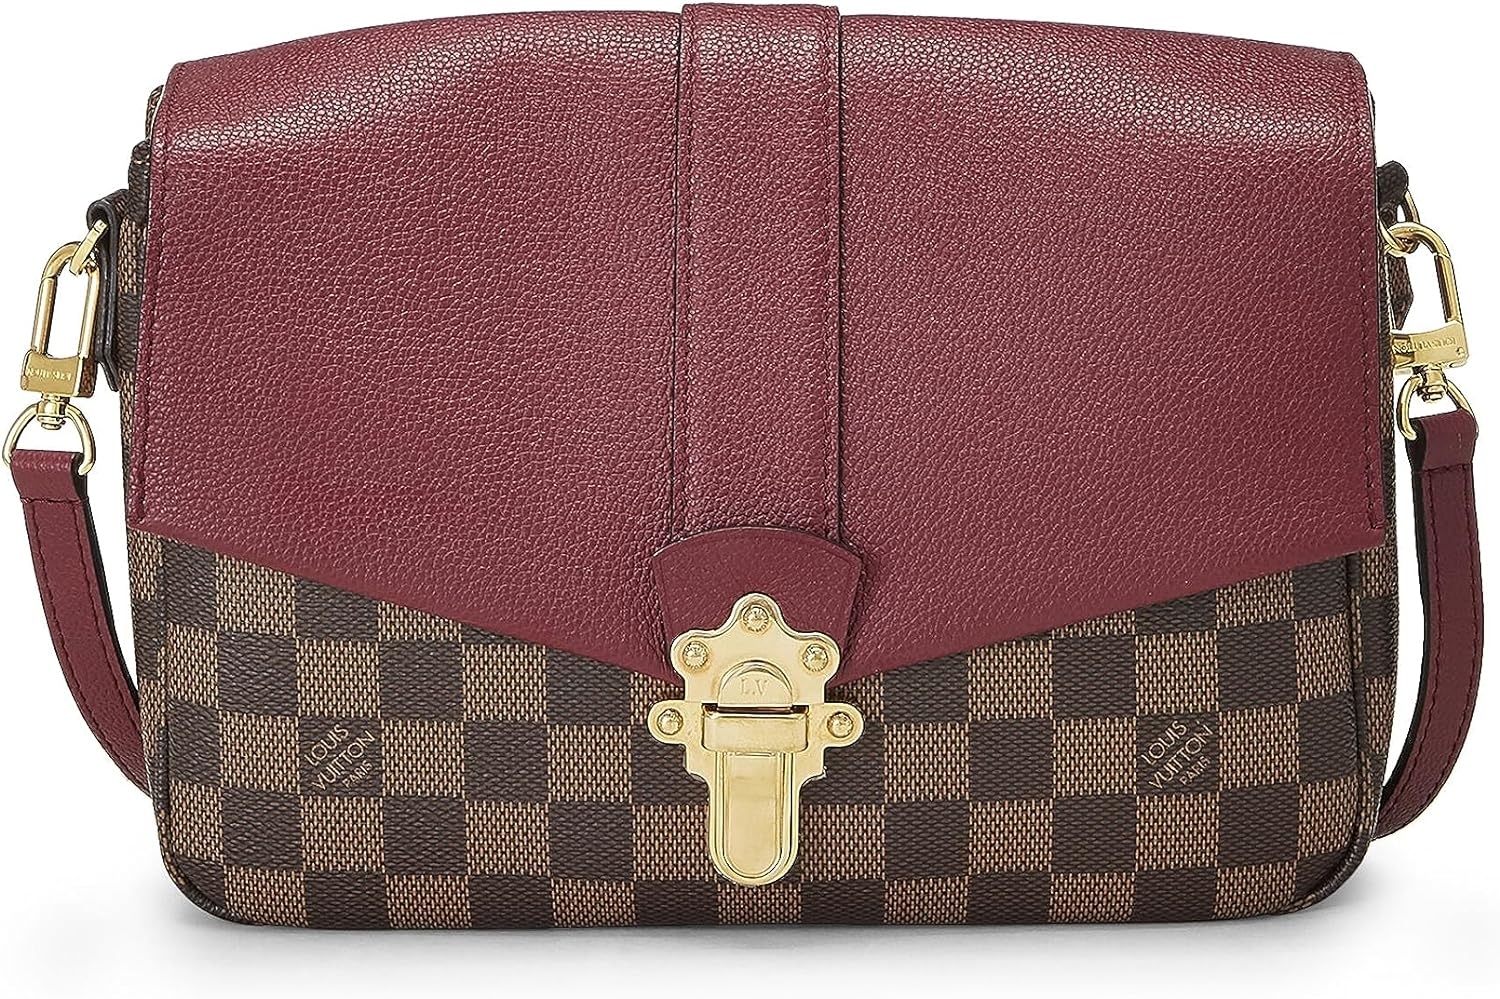 solid burgundy and brown check Louis Vuitton crossbody